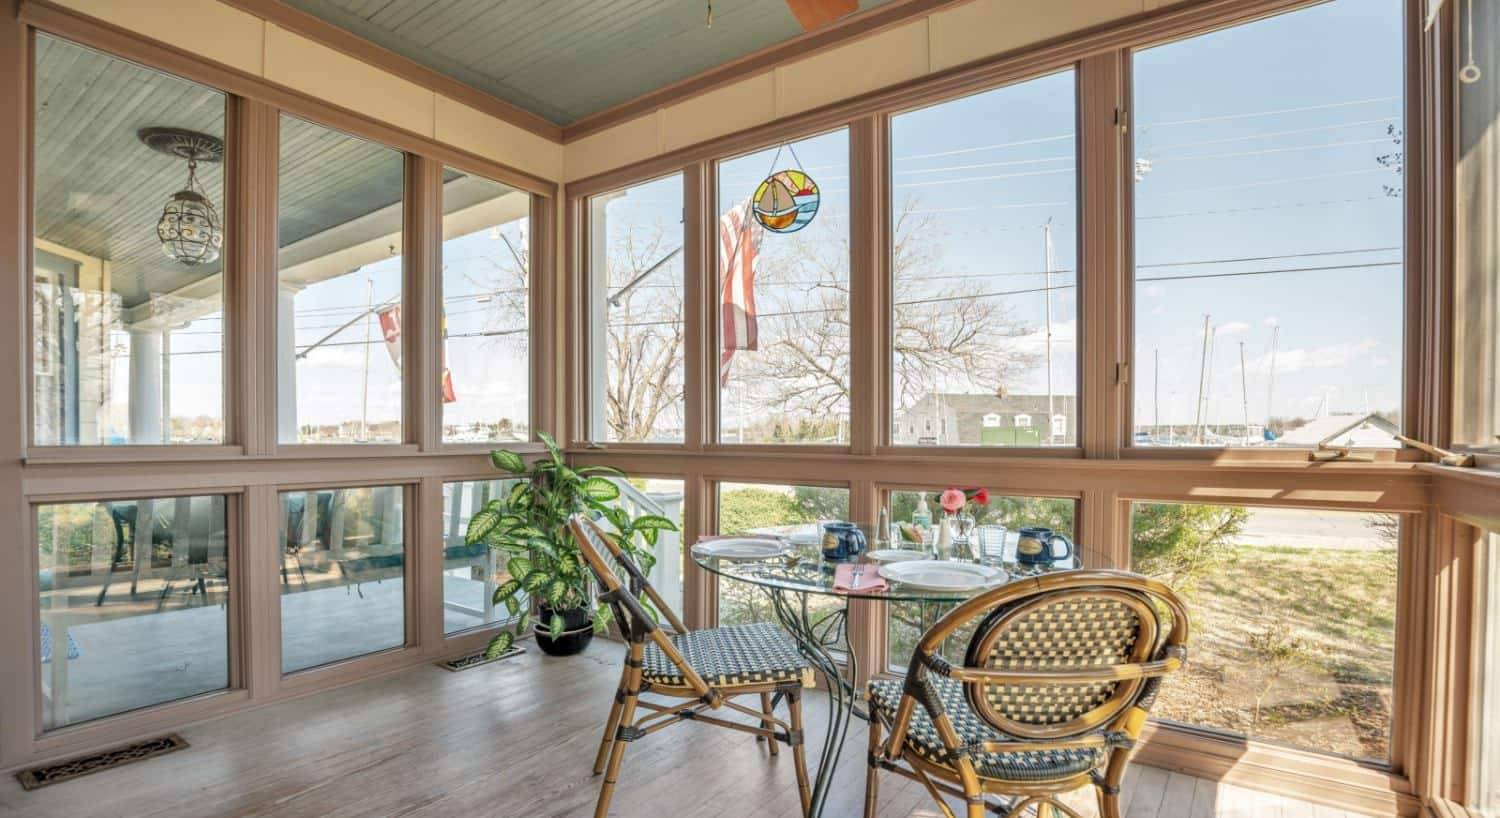 Large enclosed sunroom with glass table and two wicker chairs and a view to the outside